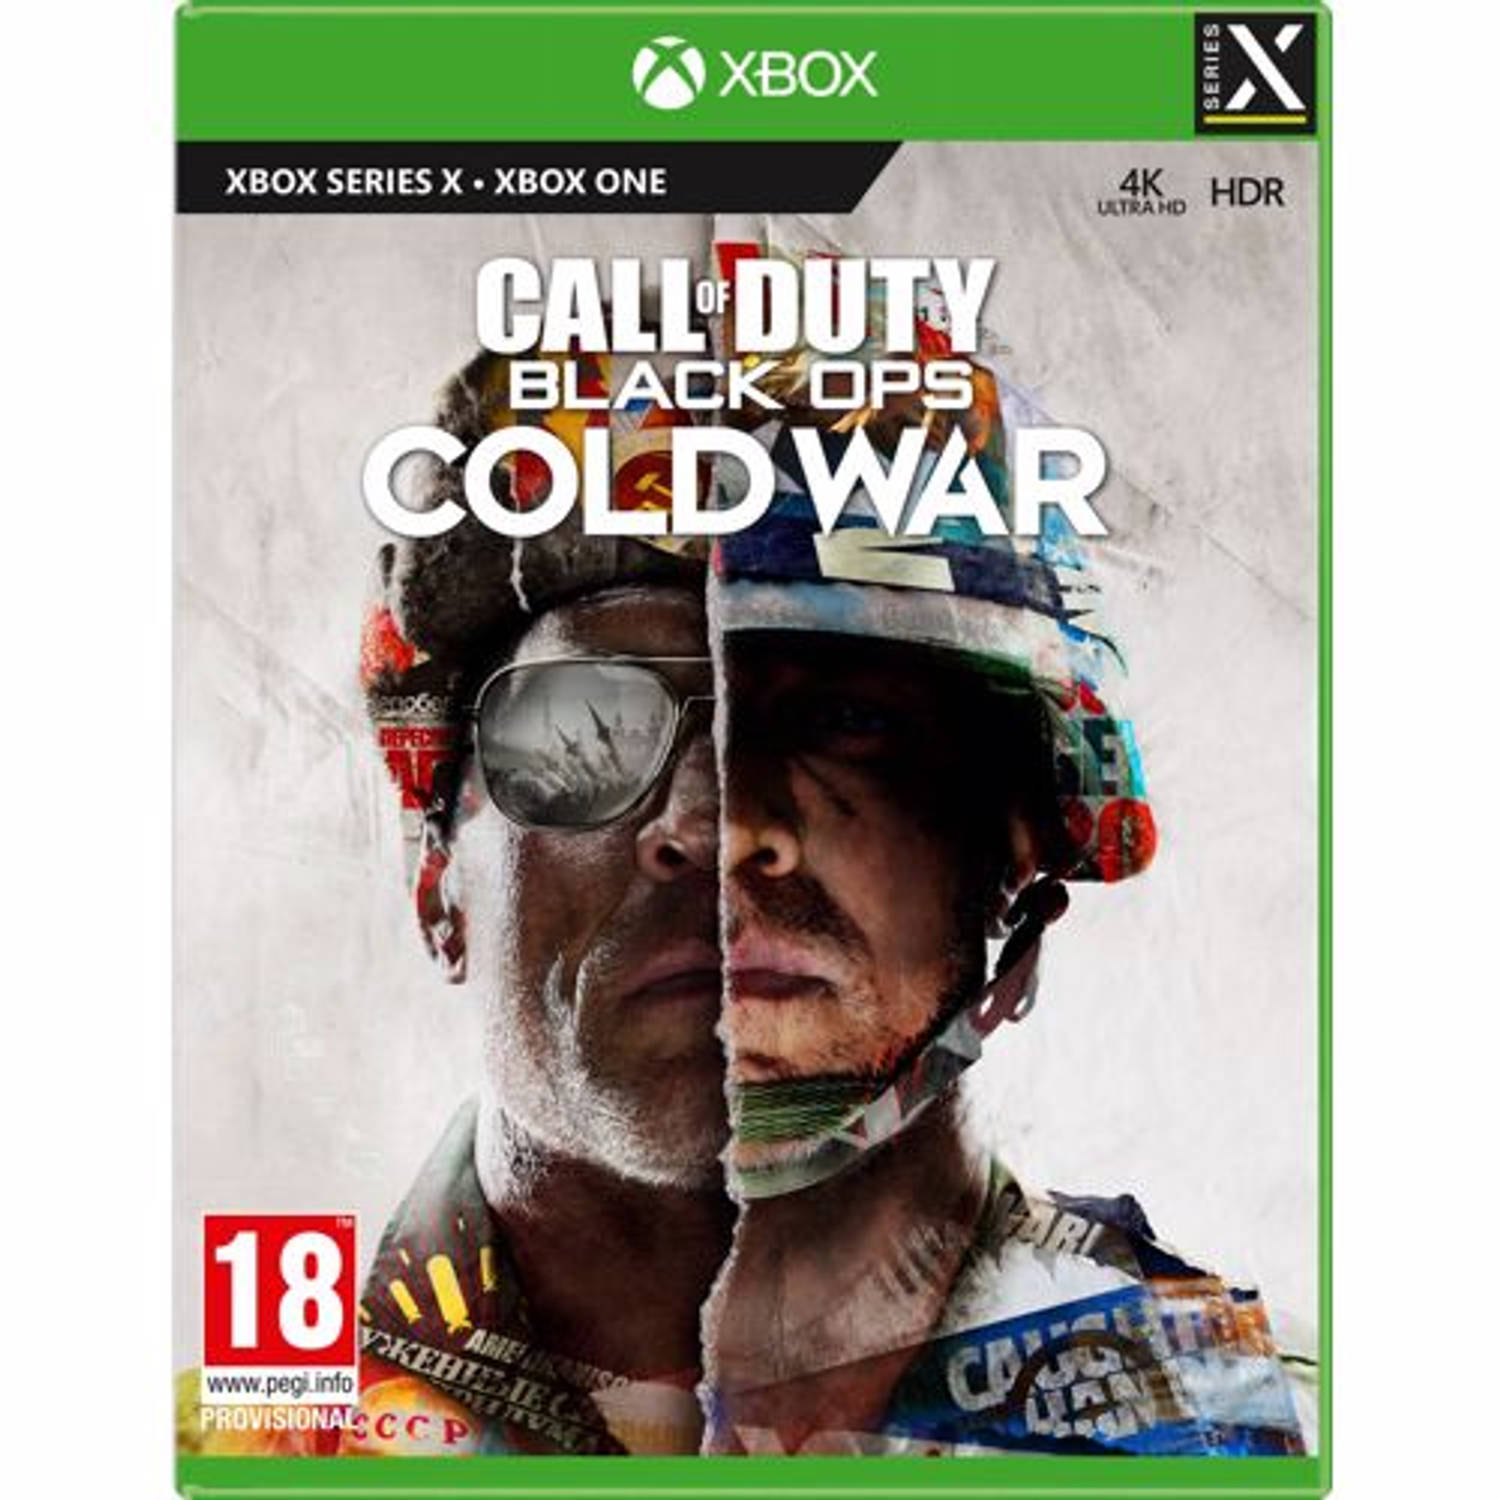 Call of duty Black ops Cold war. XBOXSERIESX